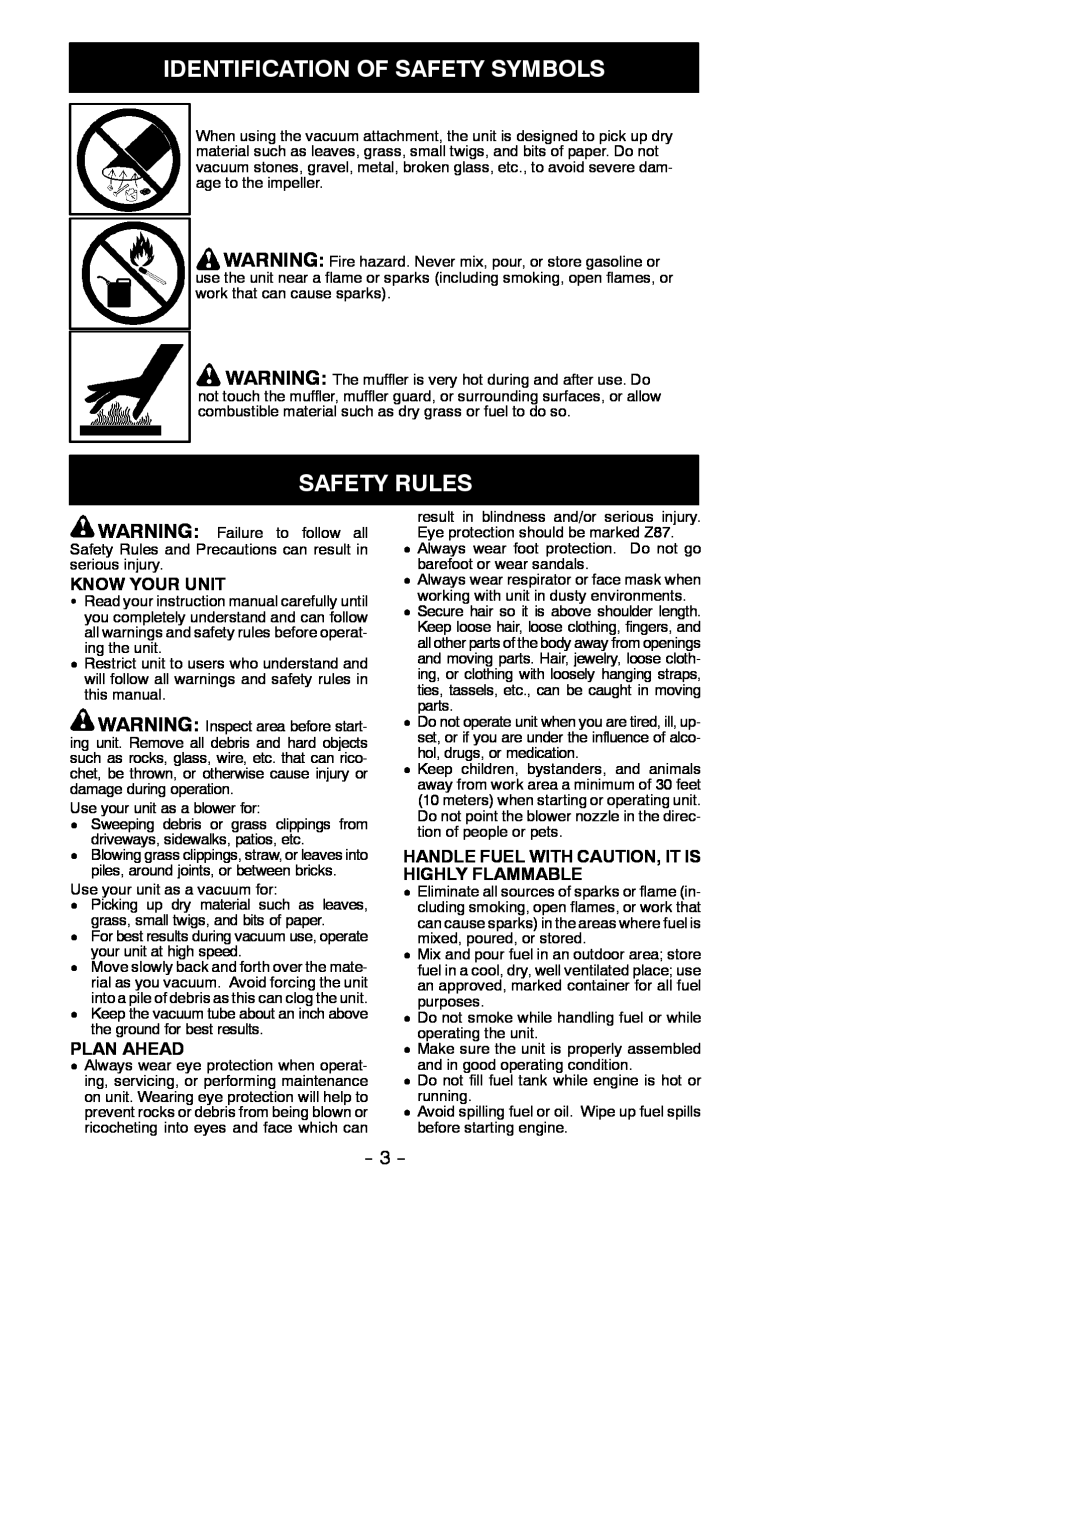 Poulan 115351327, 952711945 instruction manual Safety Rules, Identification Of Safety Symbols, Know Your Unit, Plan Ahead 